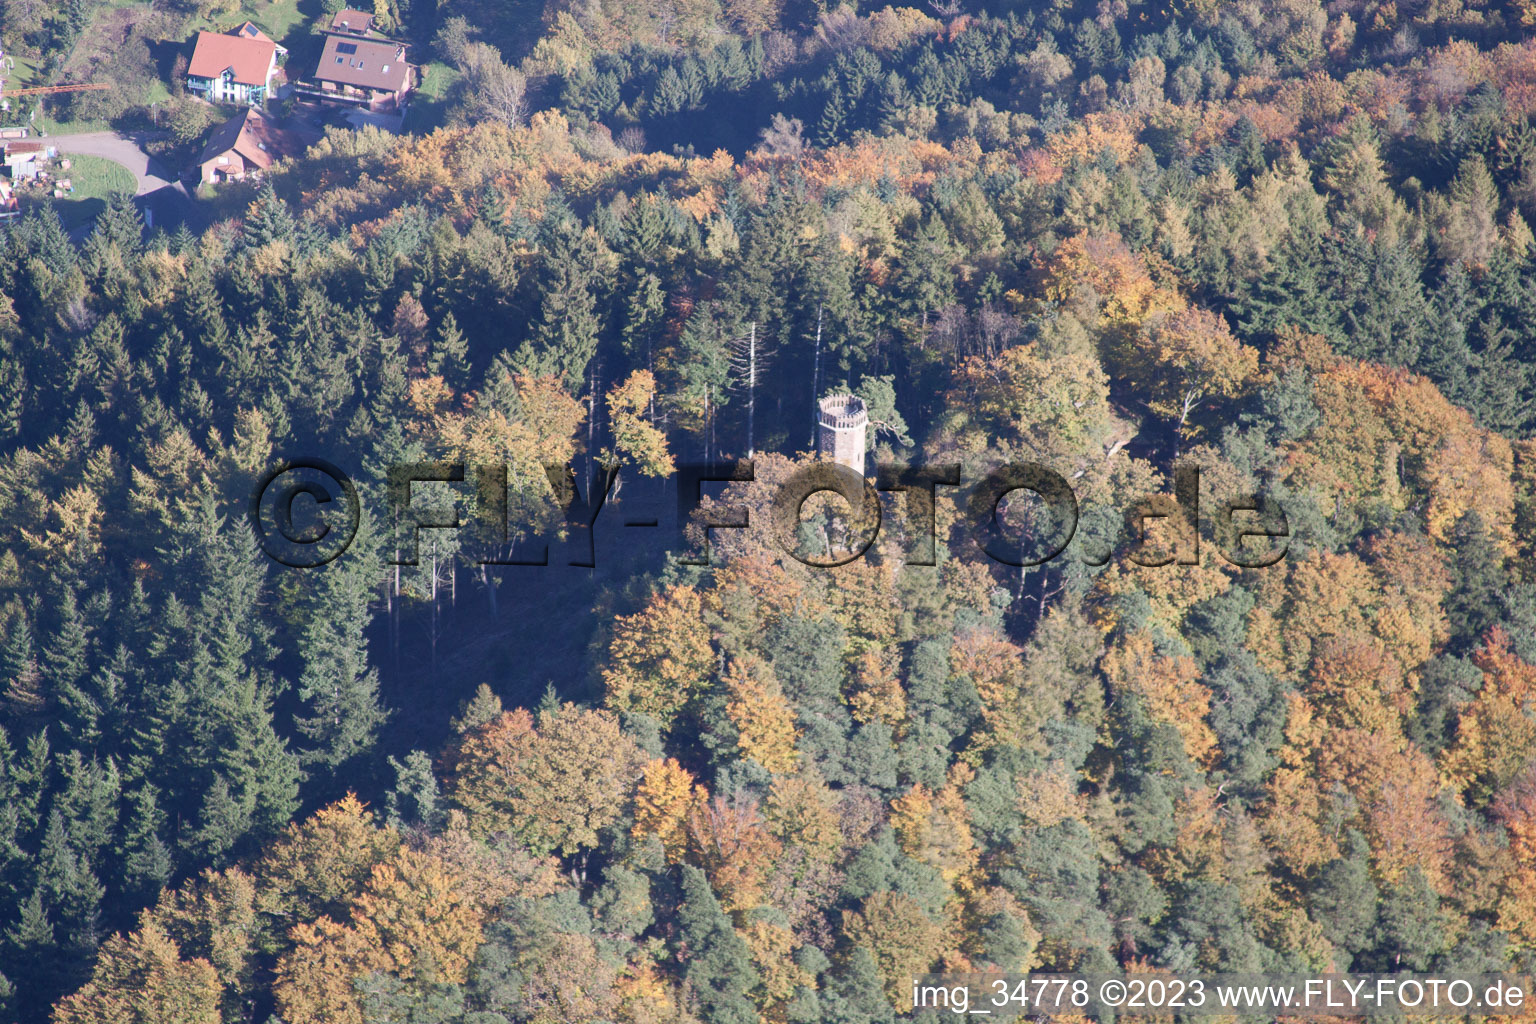 Aerial photograpy of Rehberg tower in Waldrohrbach in the state Rhineland-Palatinate, Germany